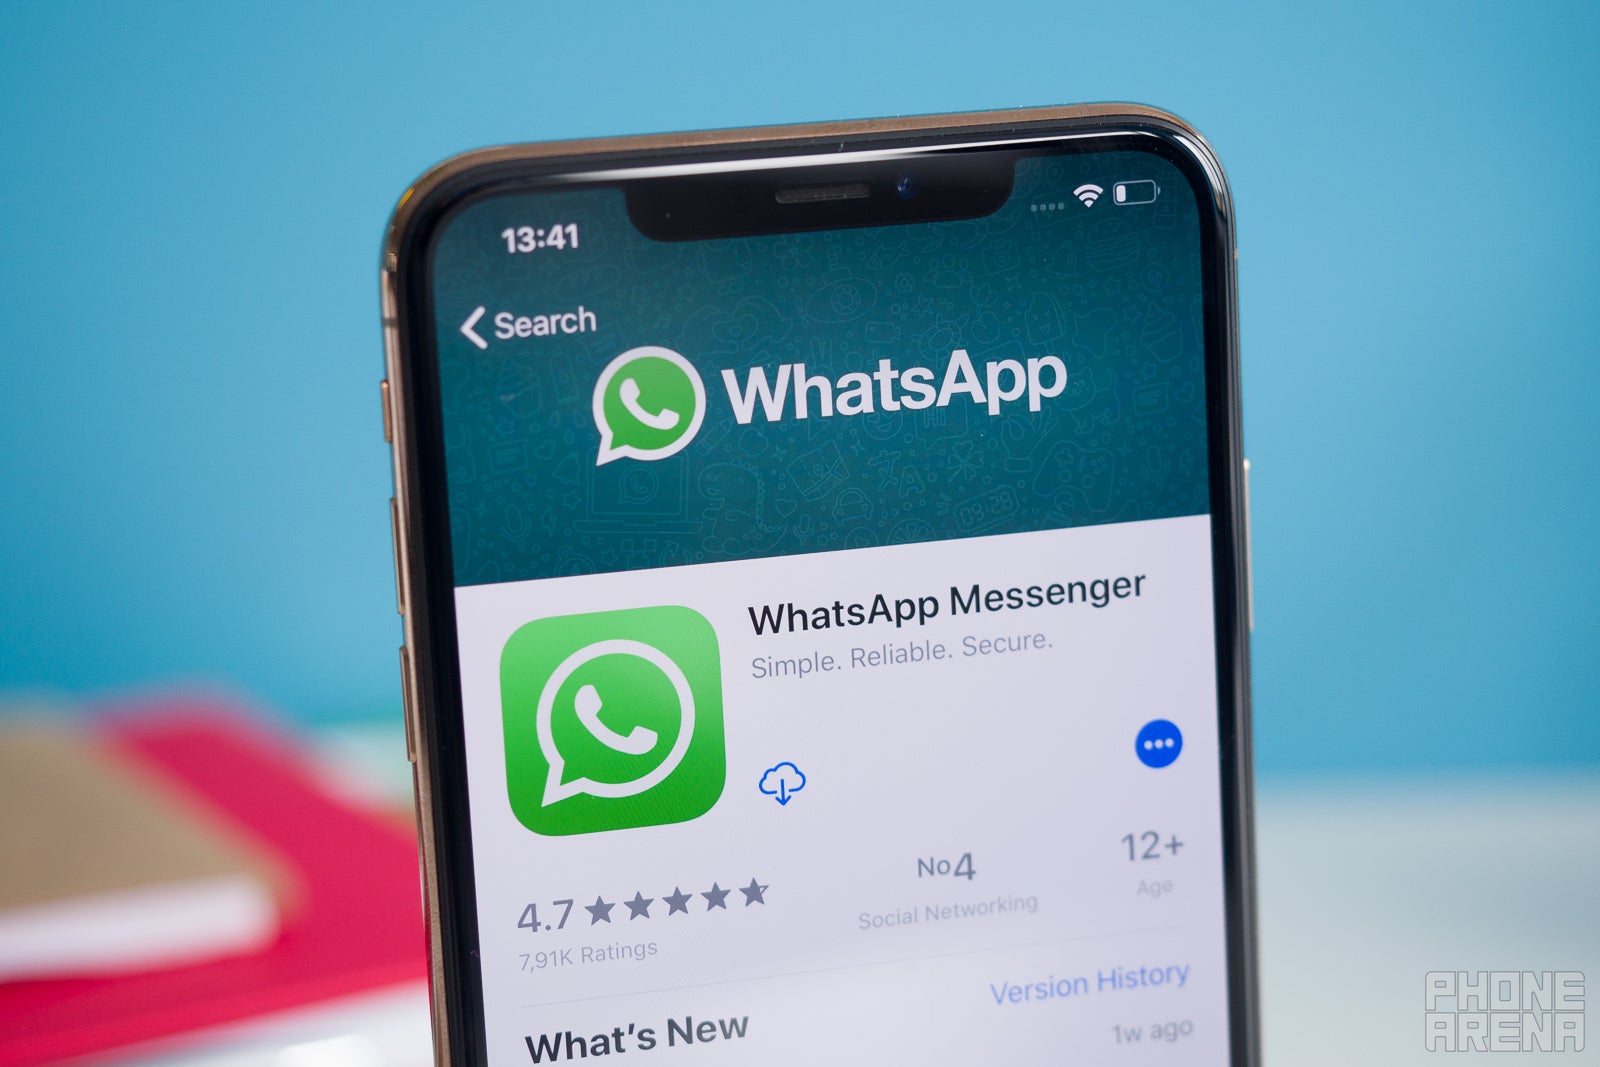 WhatsApp is one of the most popular messaging apps, with over 5 billion downloads on Android alone. - WhatsApp’s new feature Call Links begins rollout